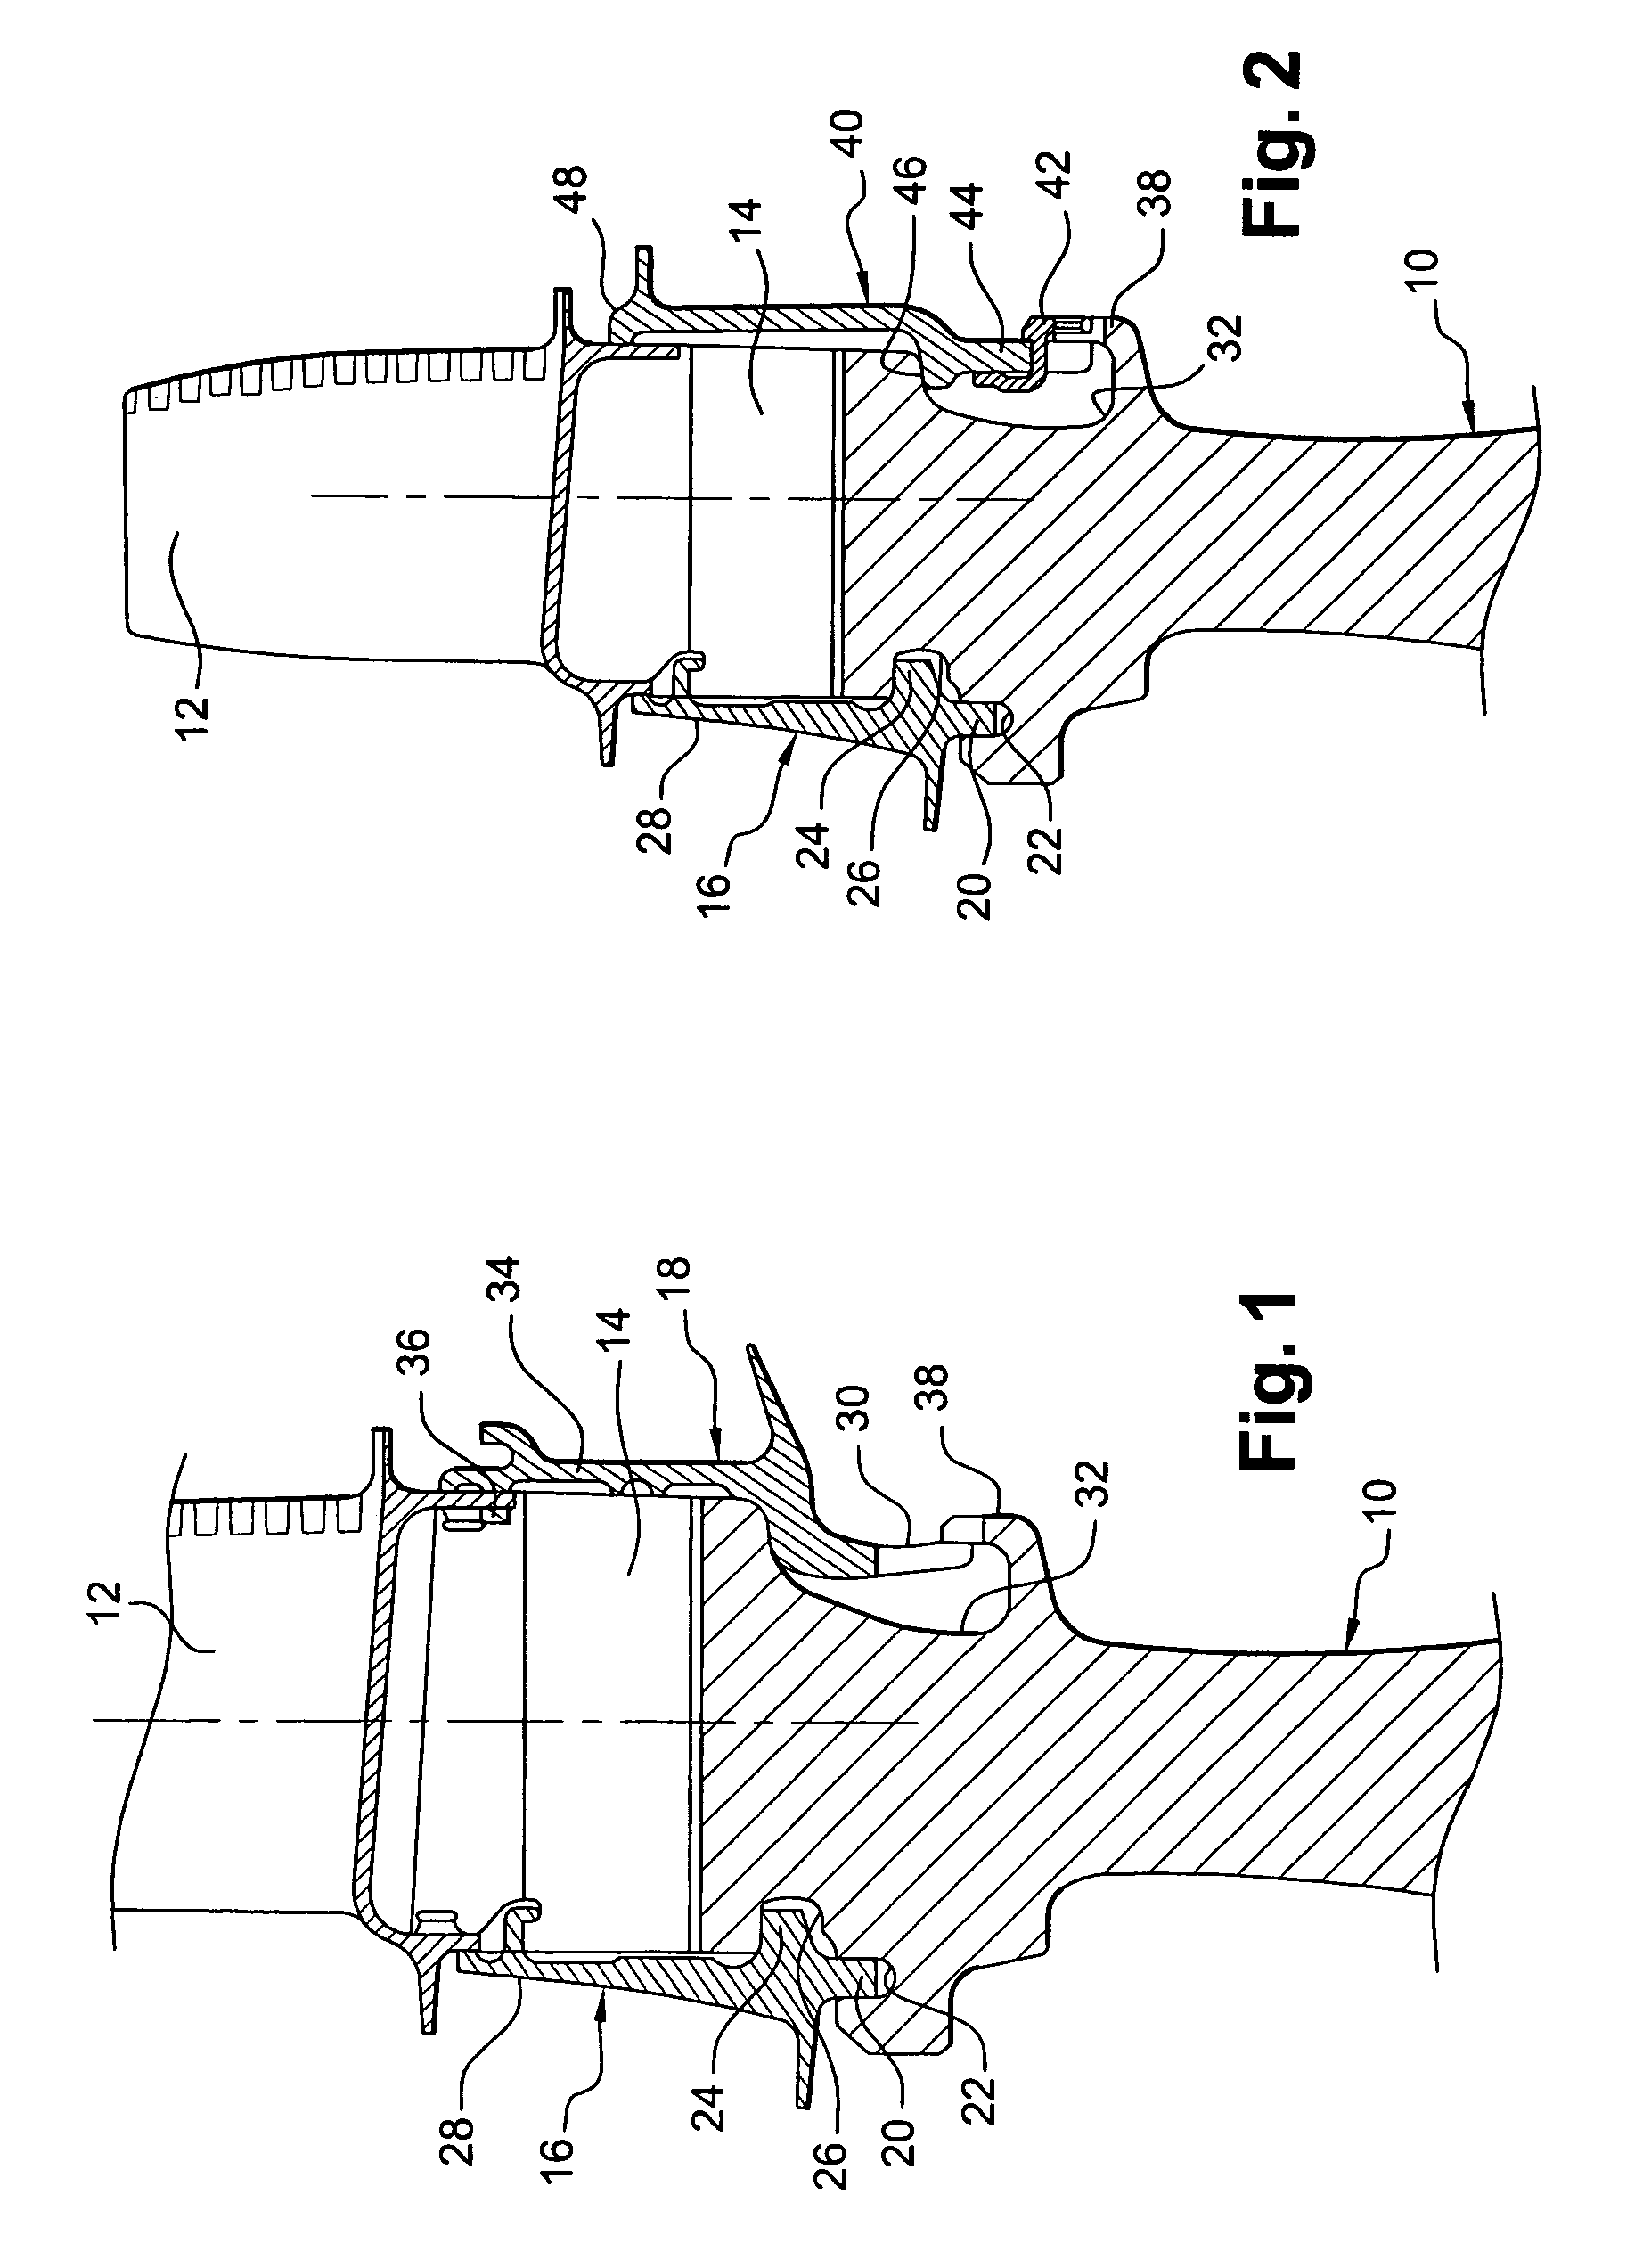 Device for axially retaining blades on a turbomachine rotor disk